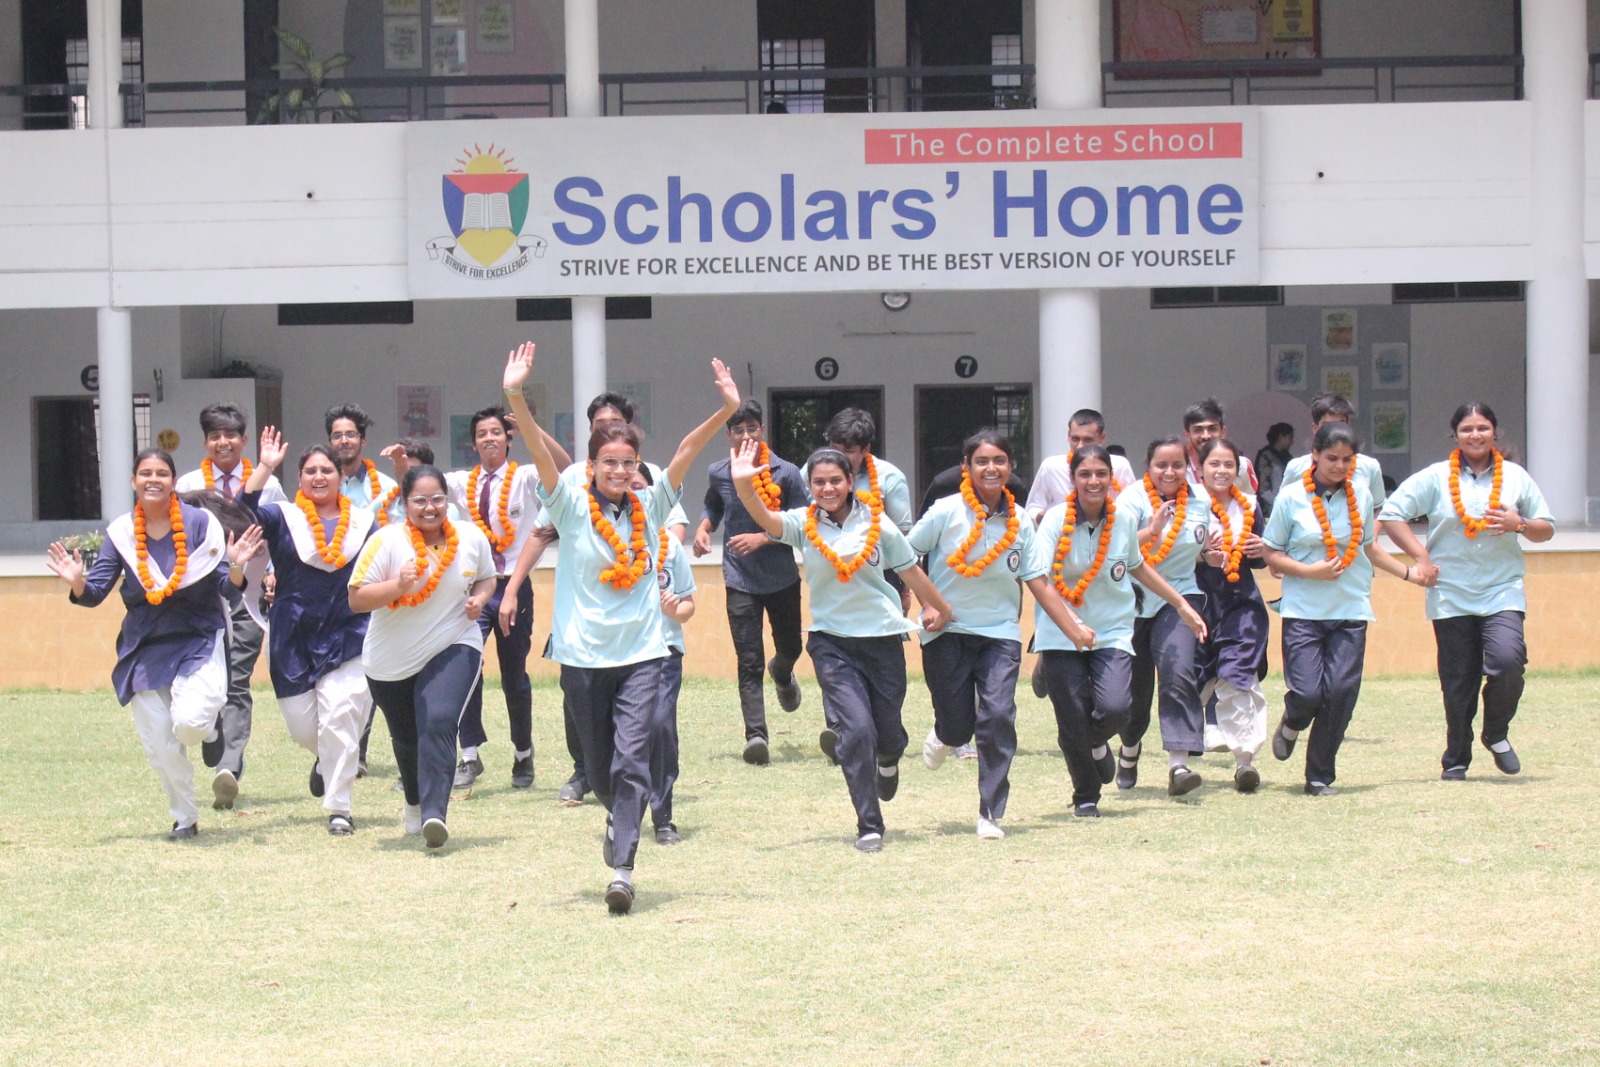 Children of Scholars Home performed excellently